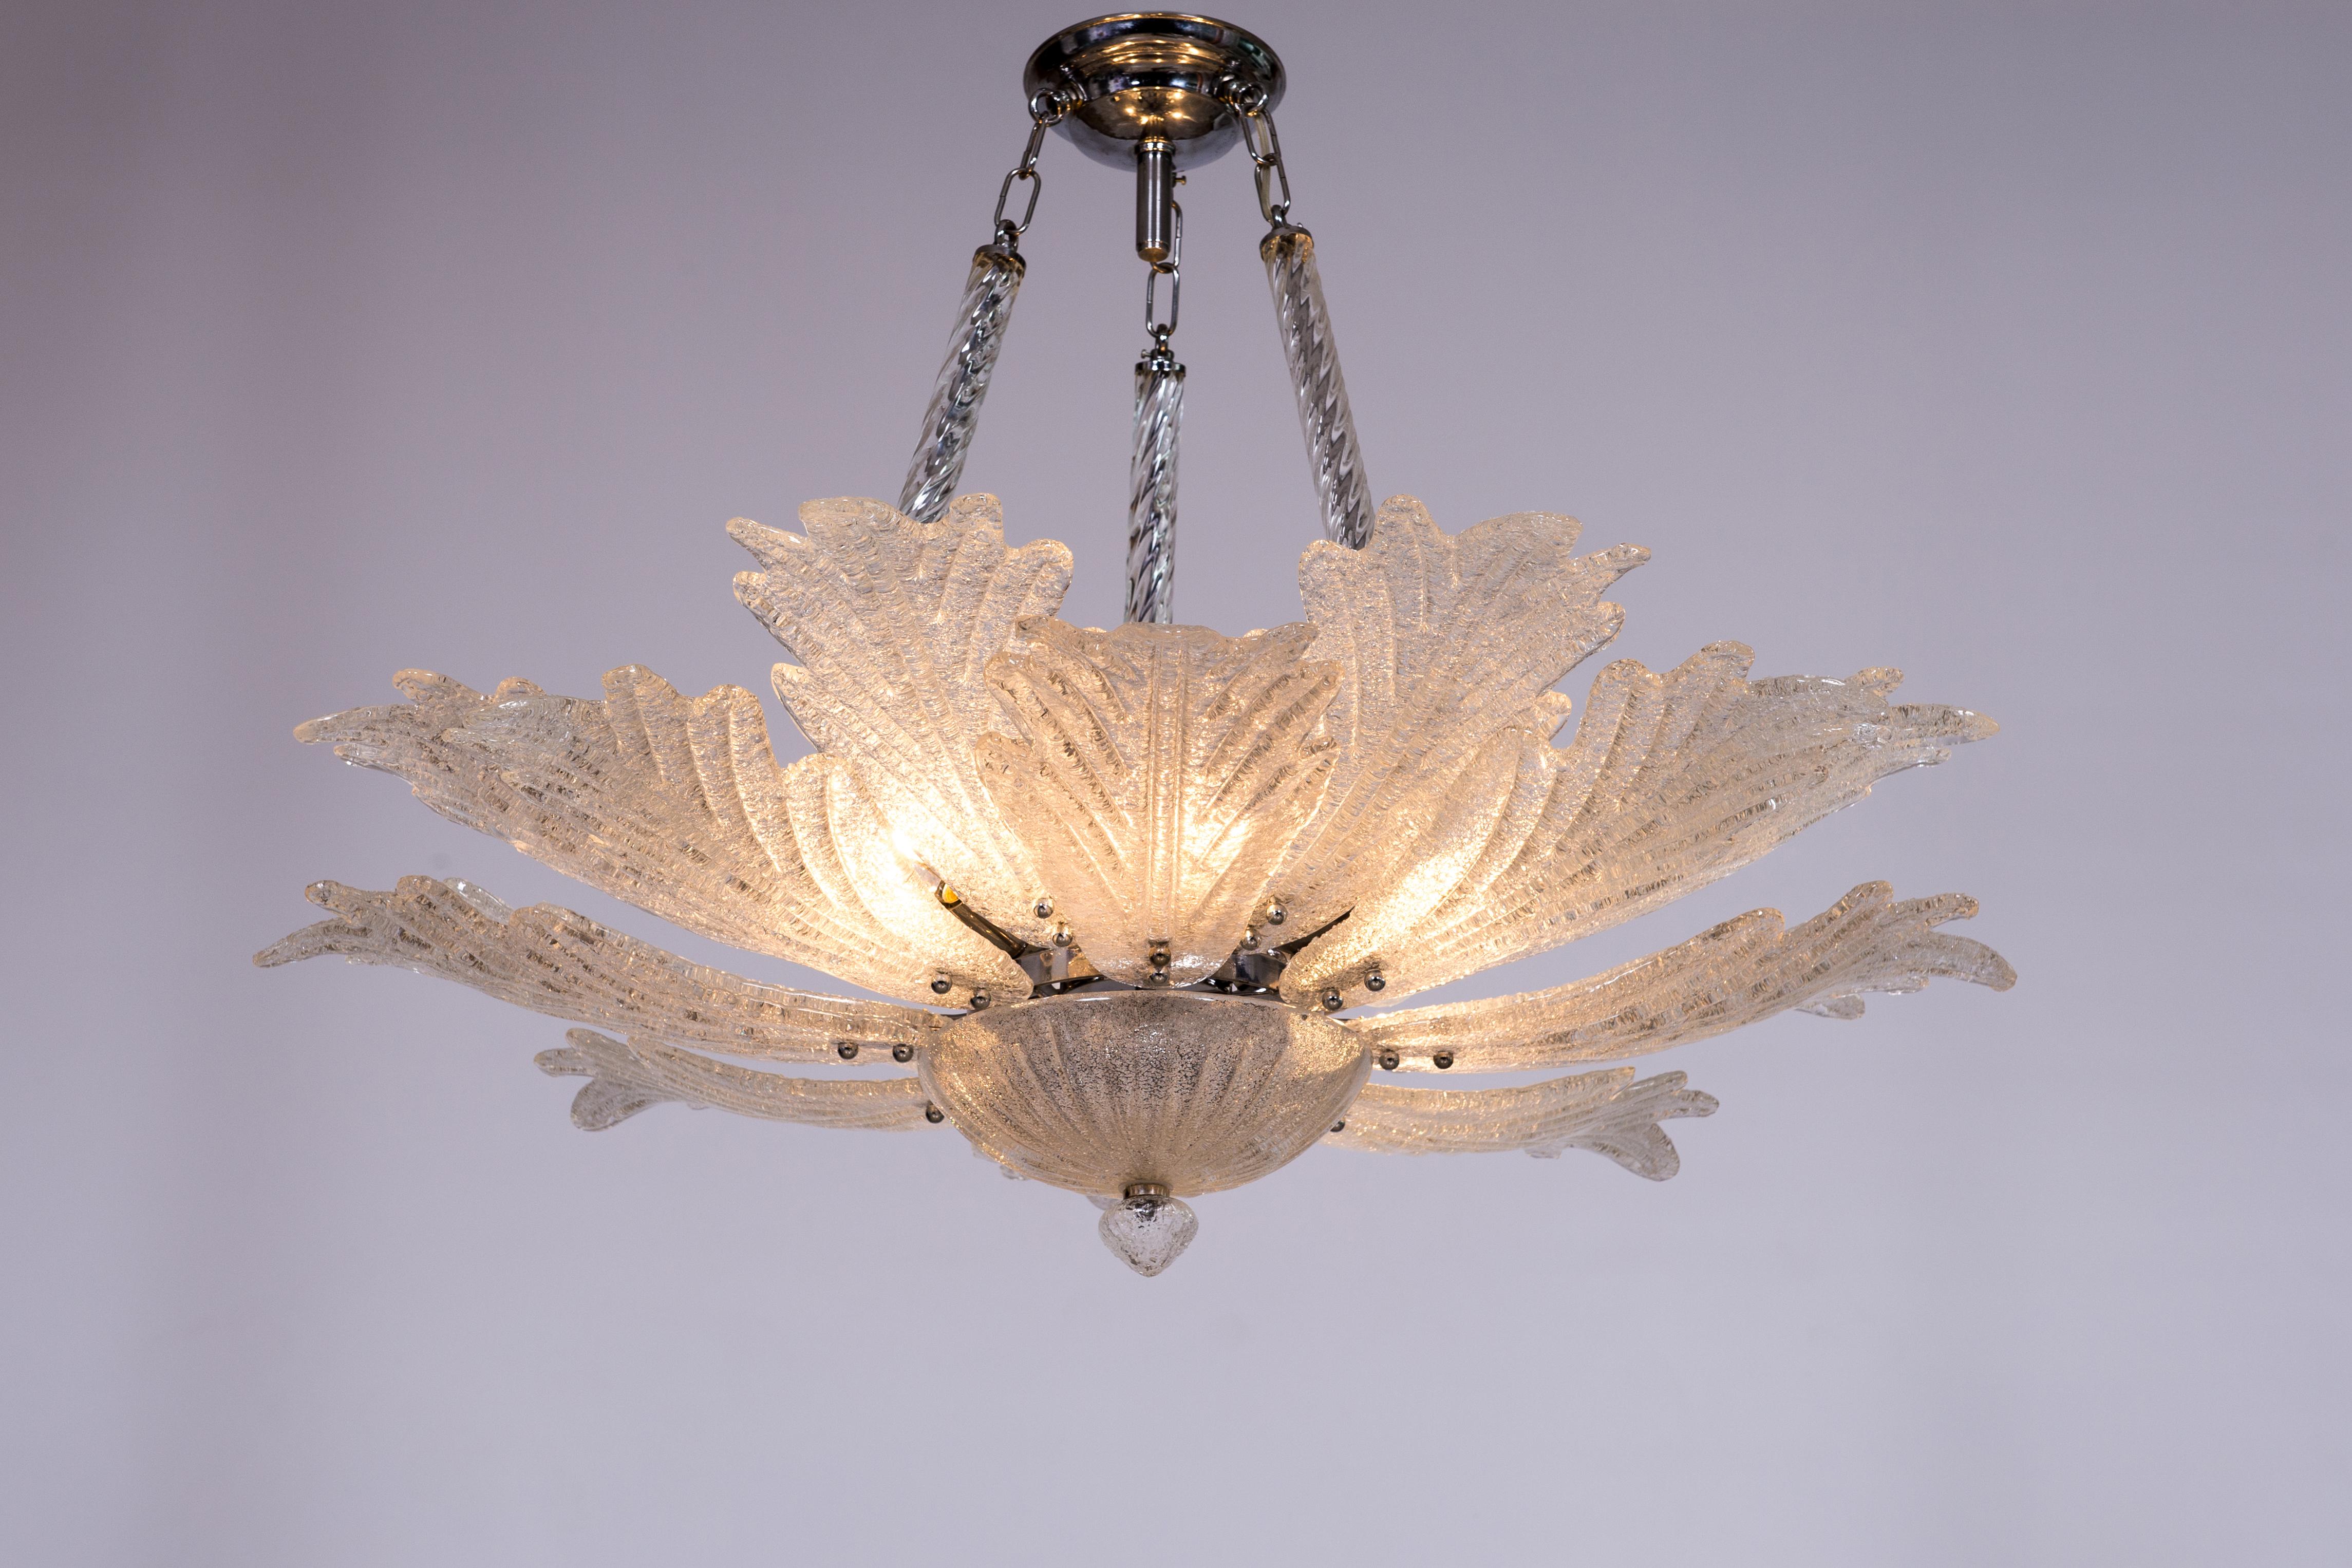 Grit Murano glass chandelier attributed to Toso 1970s Venice Italy.
The chandelier is sustained by a steel frame and three transparent twisted columns. Many designer glass leaves stretch out from the center and lean upwards; their slender shape